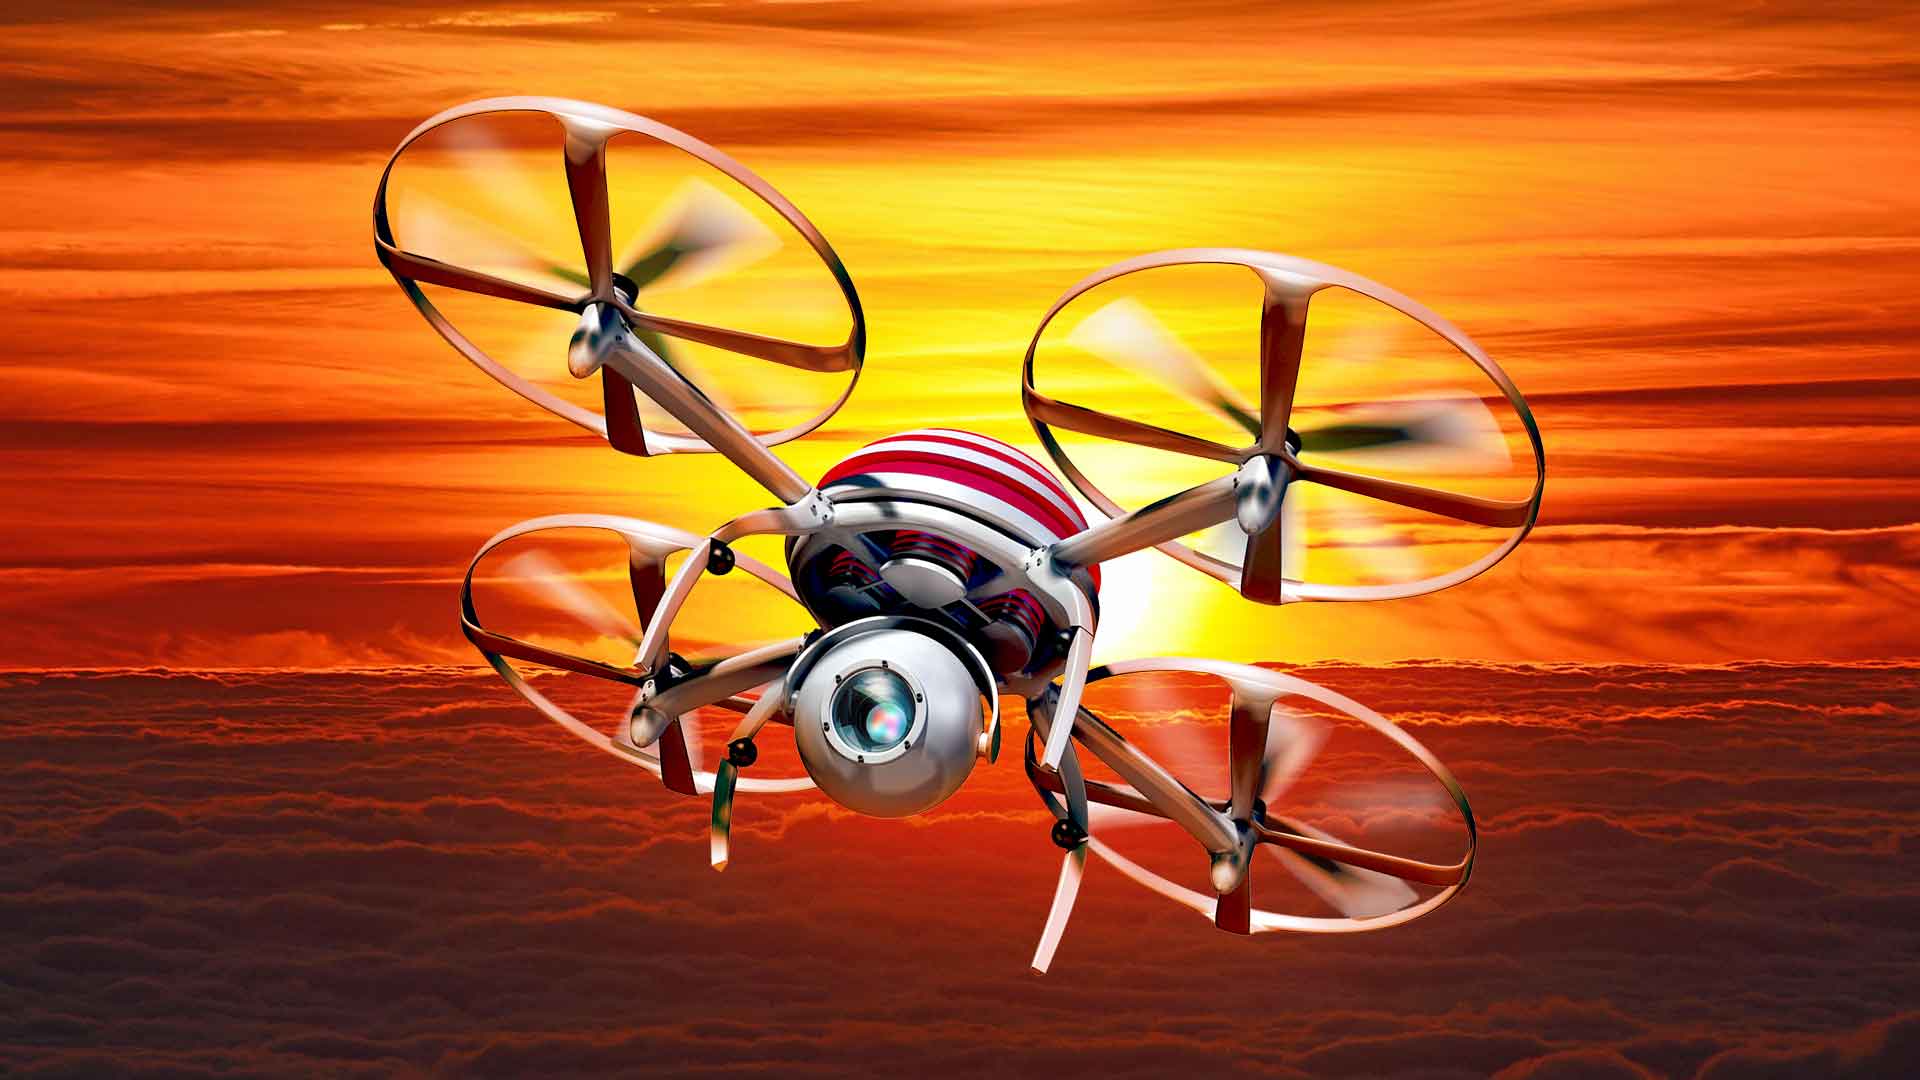 5 New Technologies That Completely Changed Camera Drones